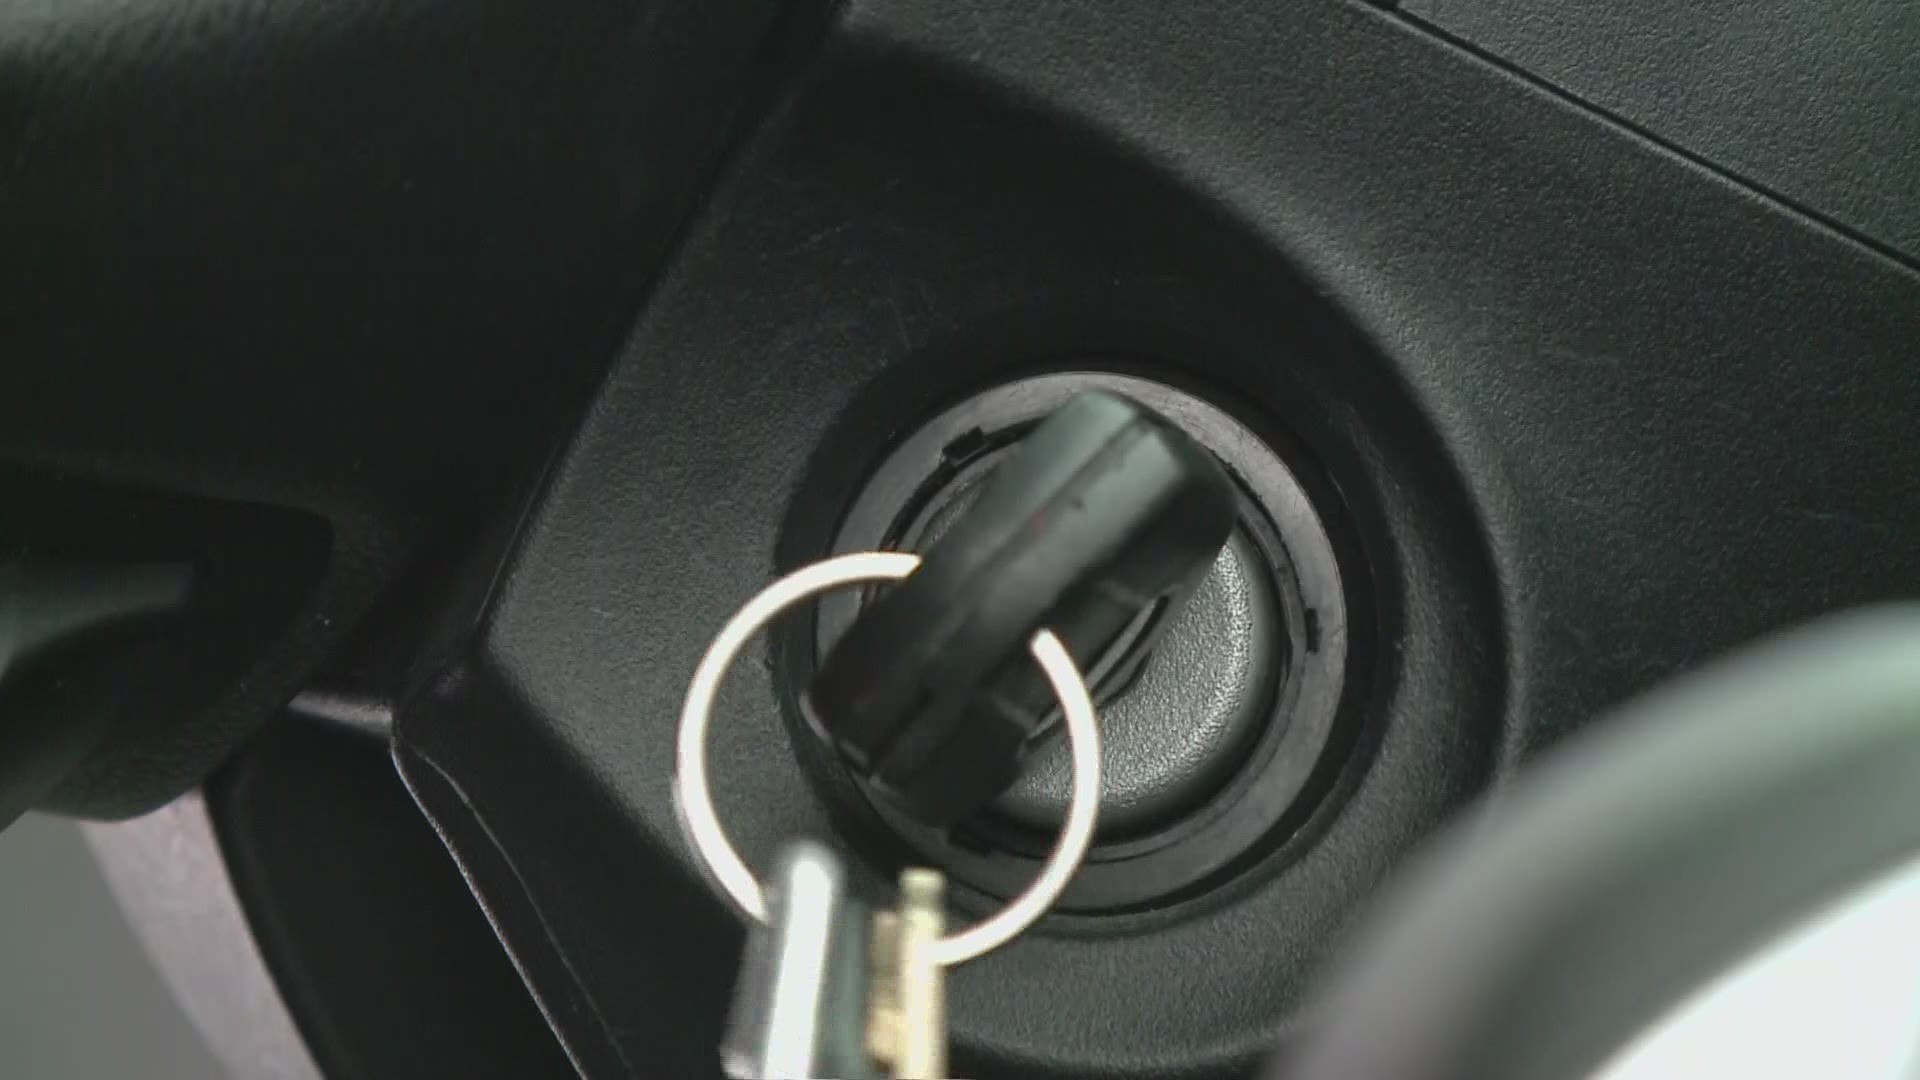 Car break-ins are not unusual in Maine. Year-round police are reminding people to lock their car doors and not leave anything valuable inside.